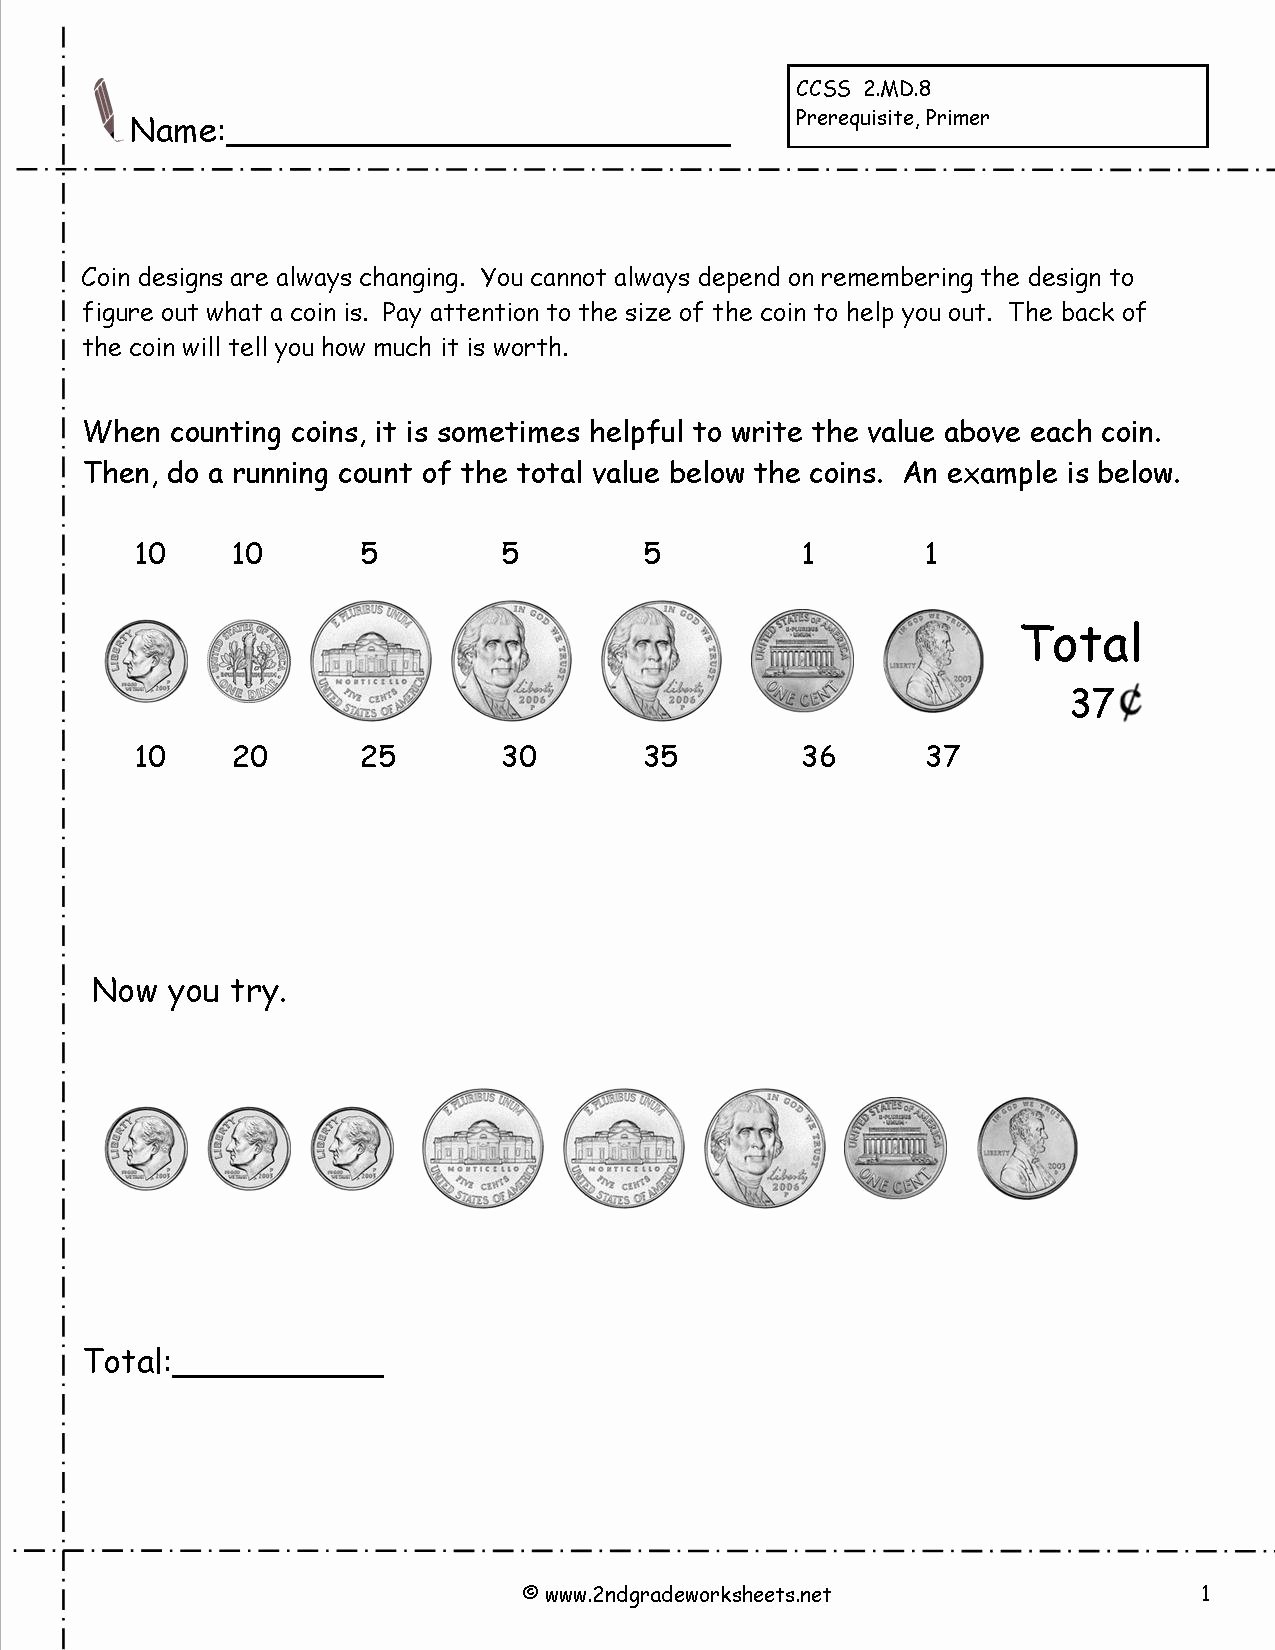 Values Of Coins Worksheet Awesome Counting Coins and Money Worksheets and Printouts